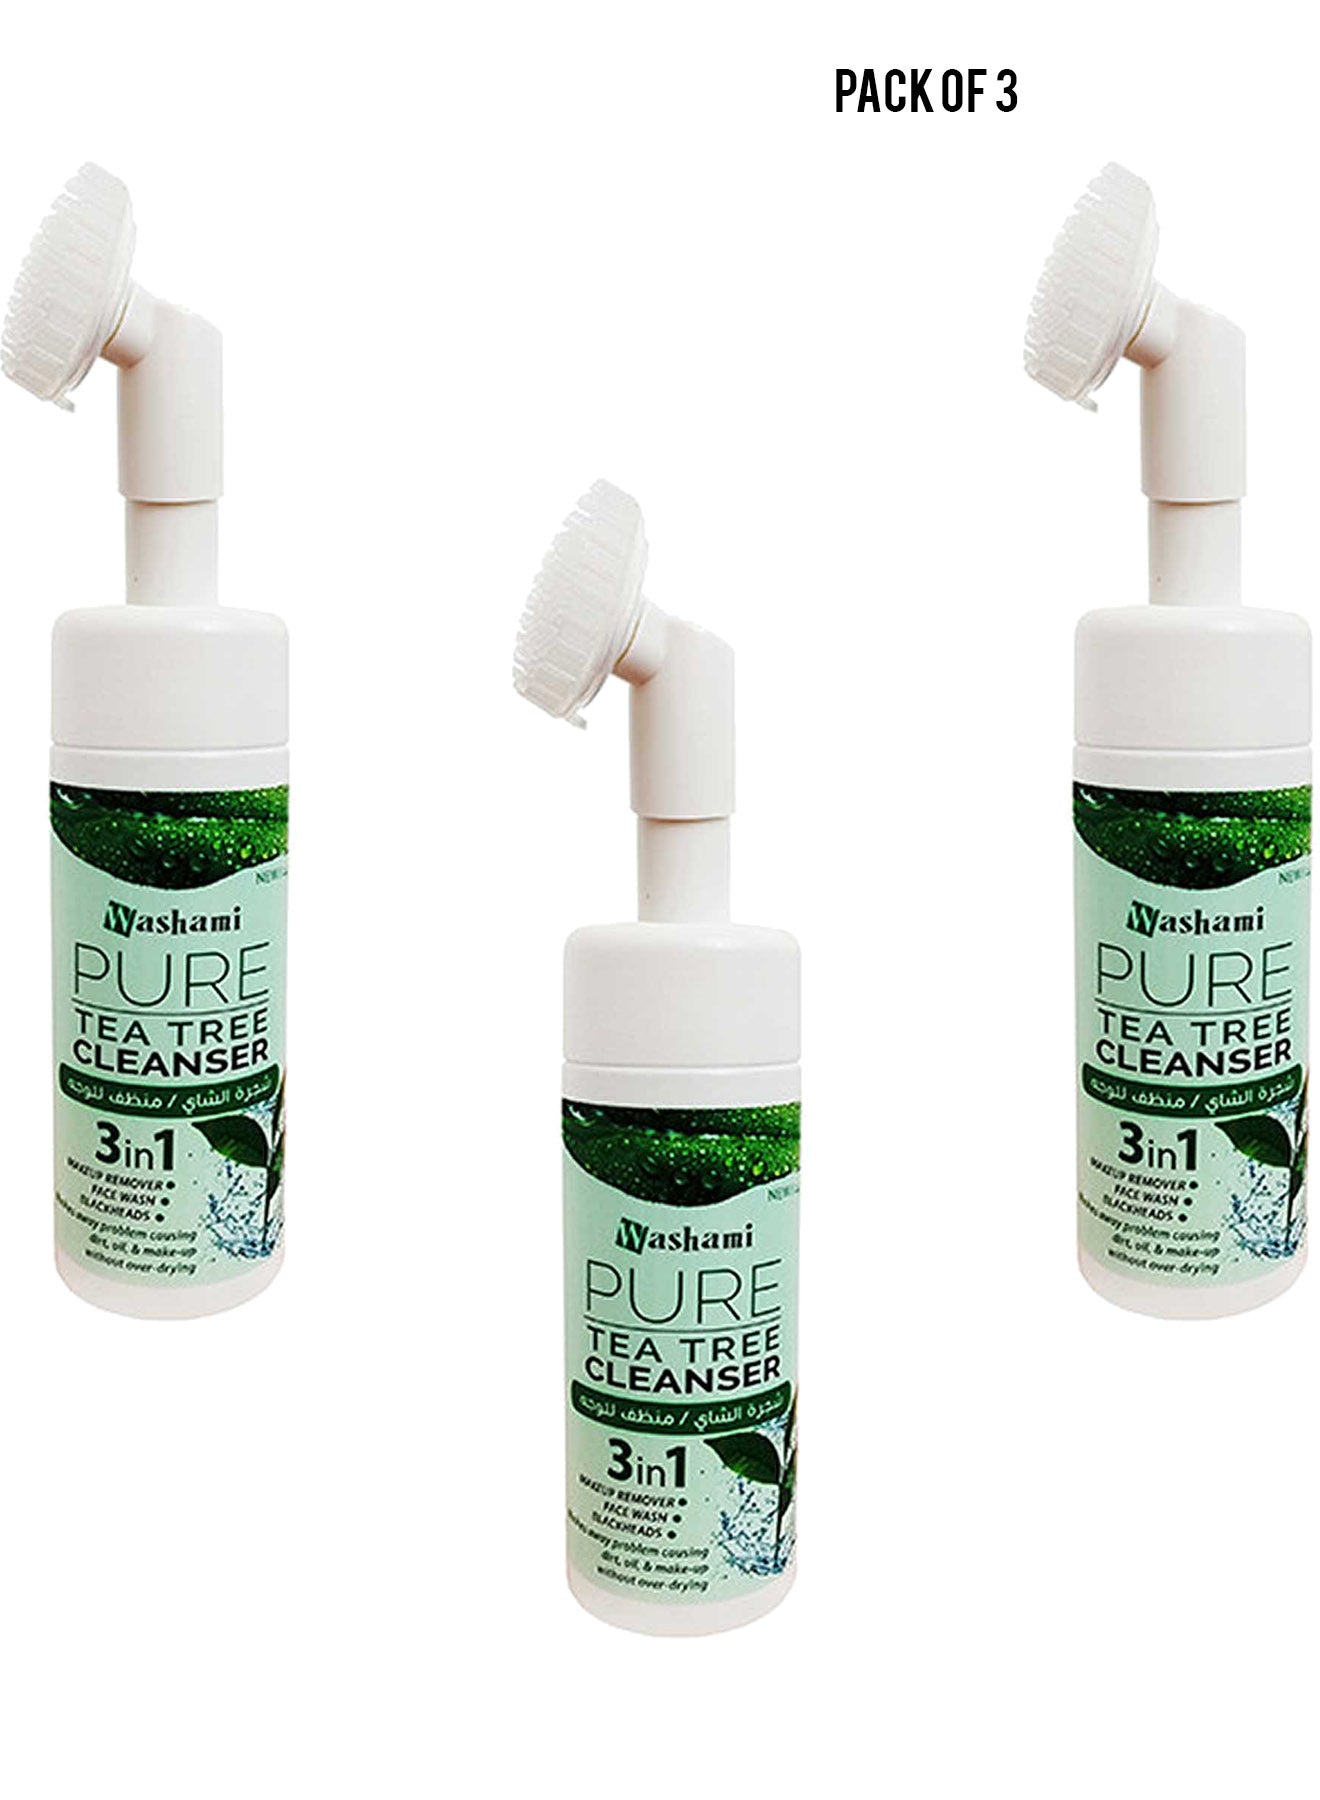 Washami Pure Tea Tree Cleanser 3 in 1 Value Pack of 3 